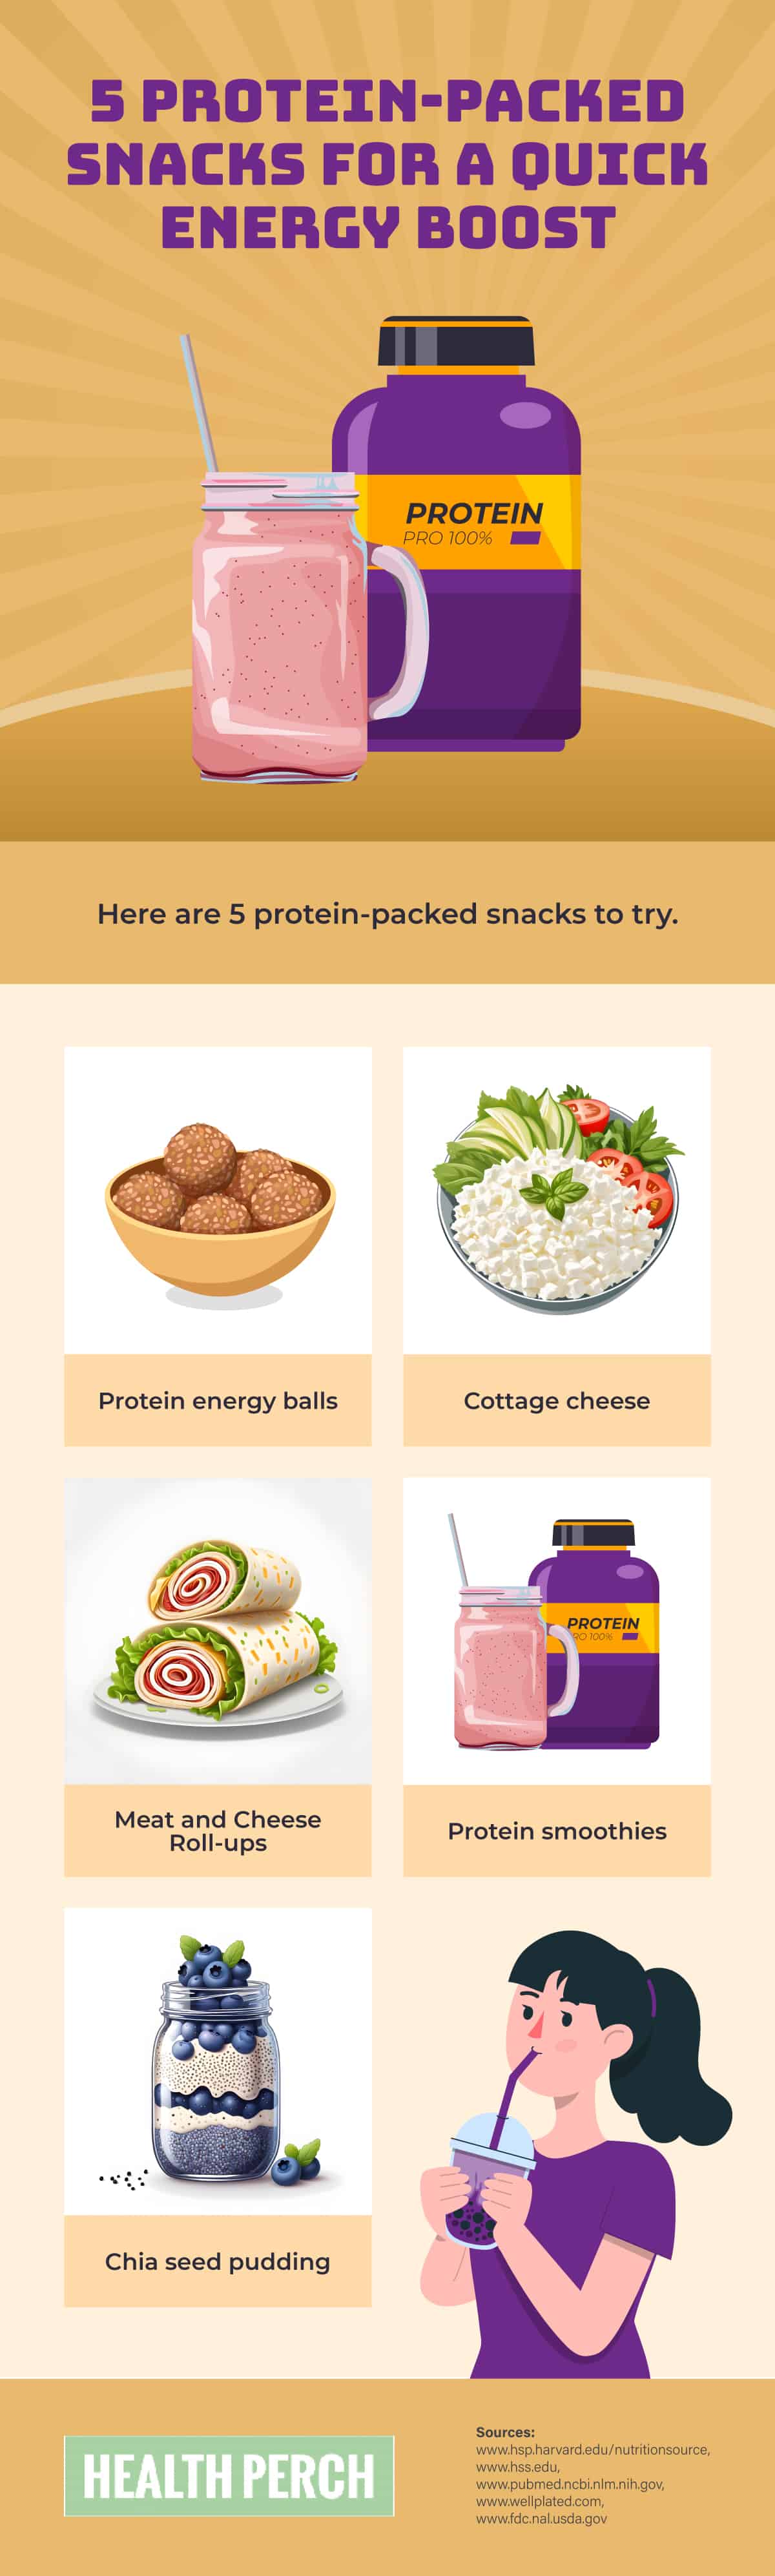 Protein-Packed Snacks